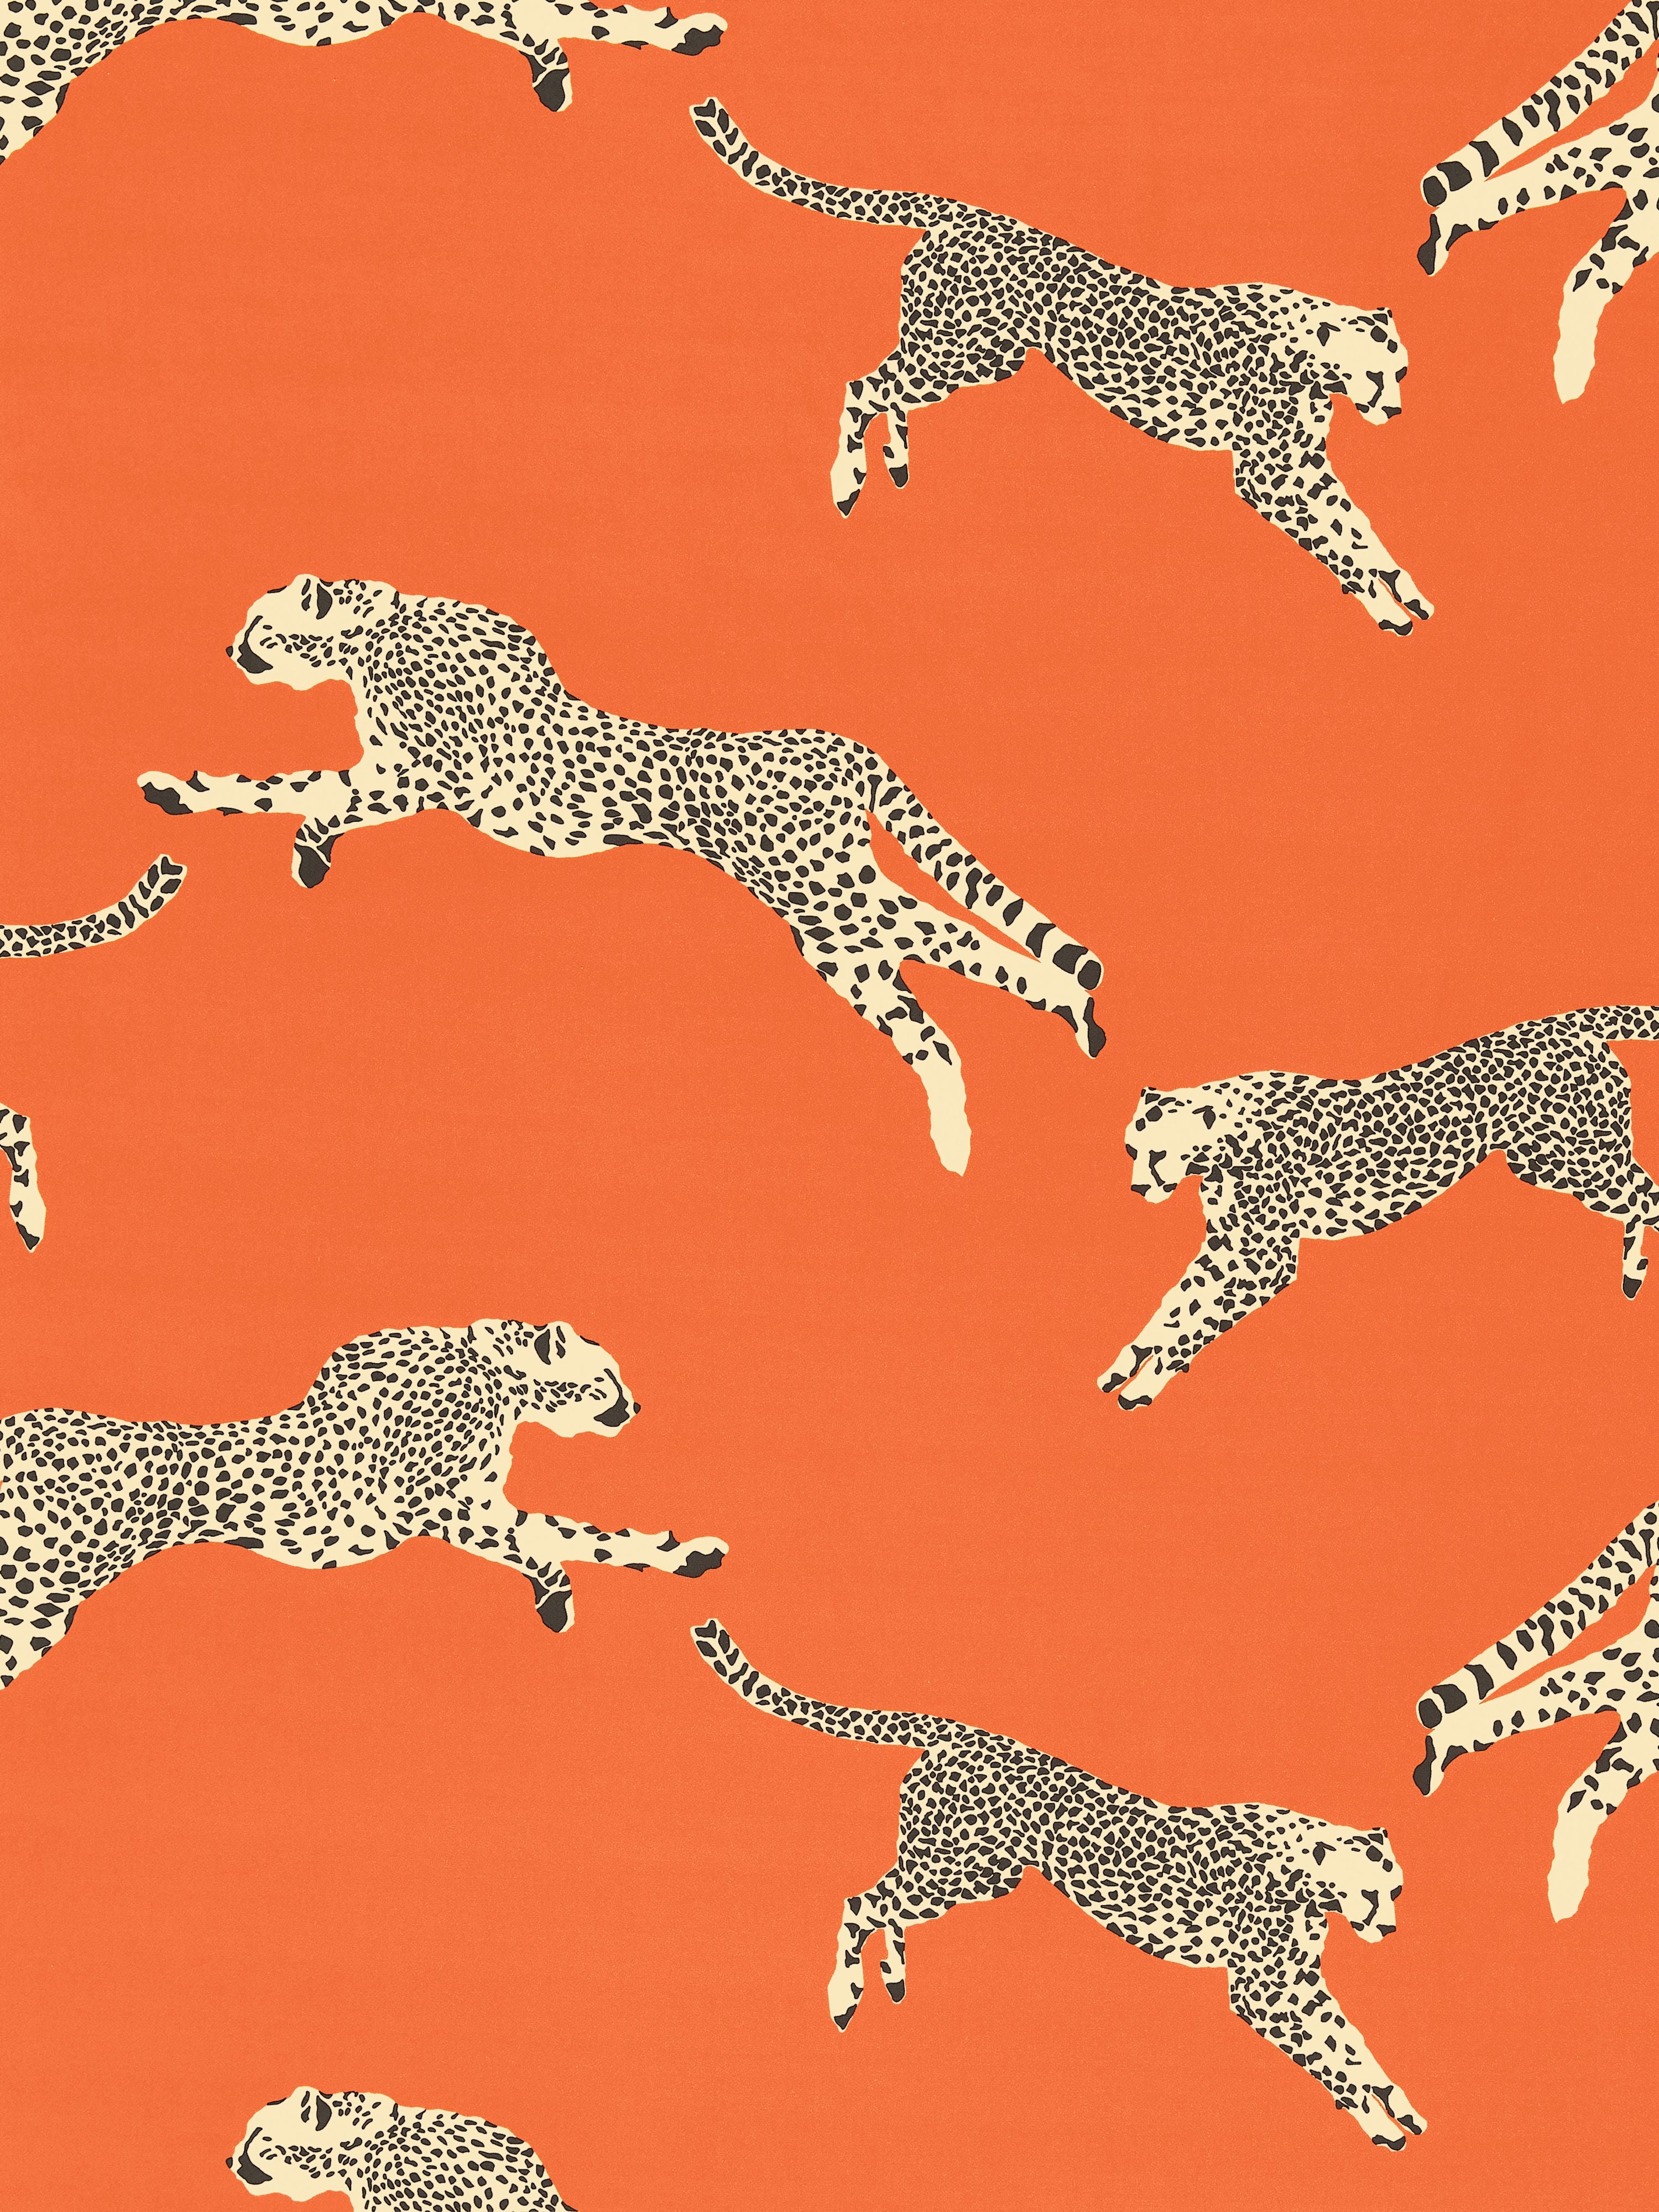 Leaping Cheetah Cotton Print fabric in clementine color - pattern number SC 000216634 - by Scalamandre in the Scalamandre Fabrics Book 1 collection